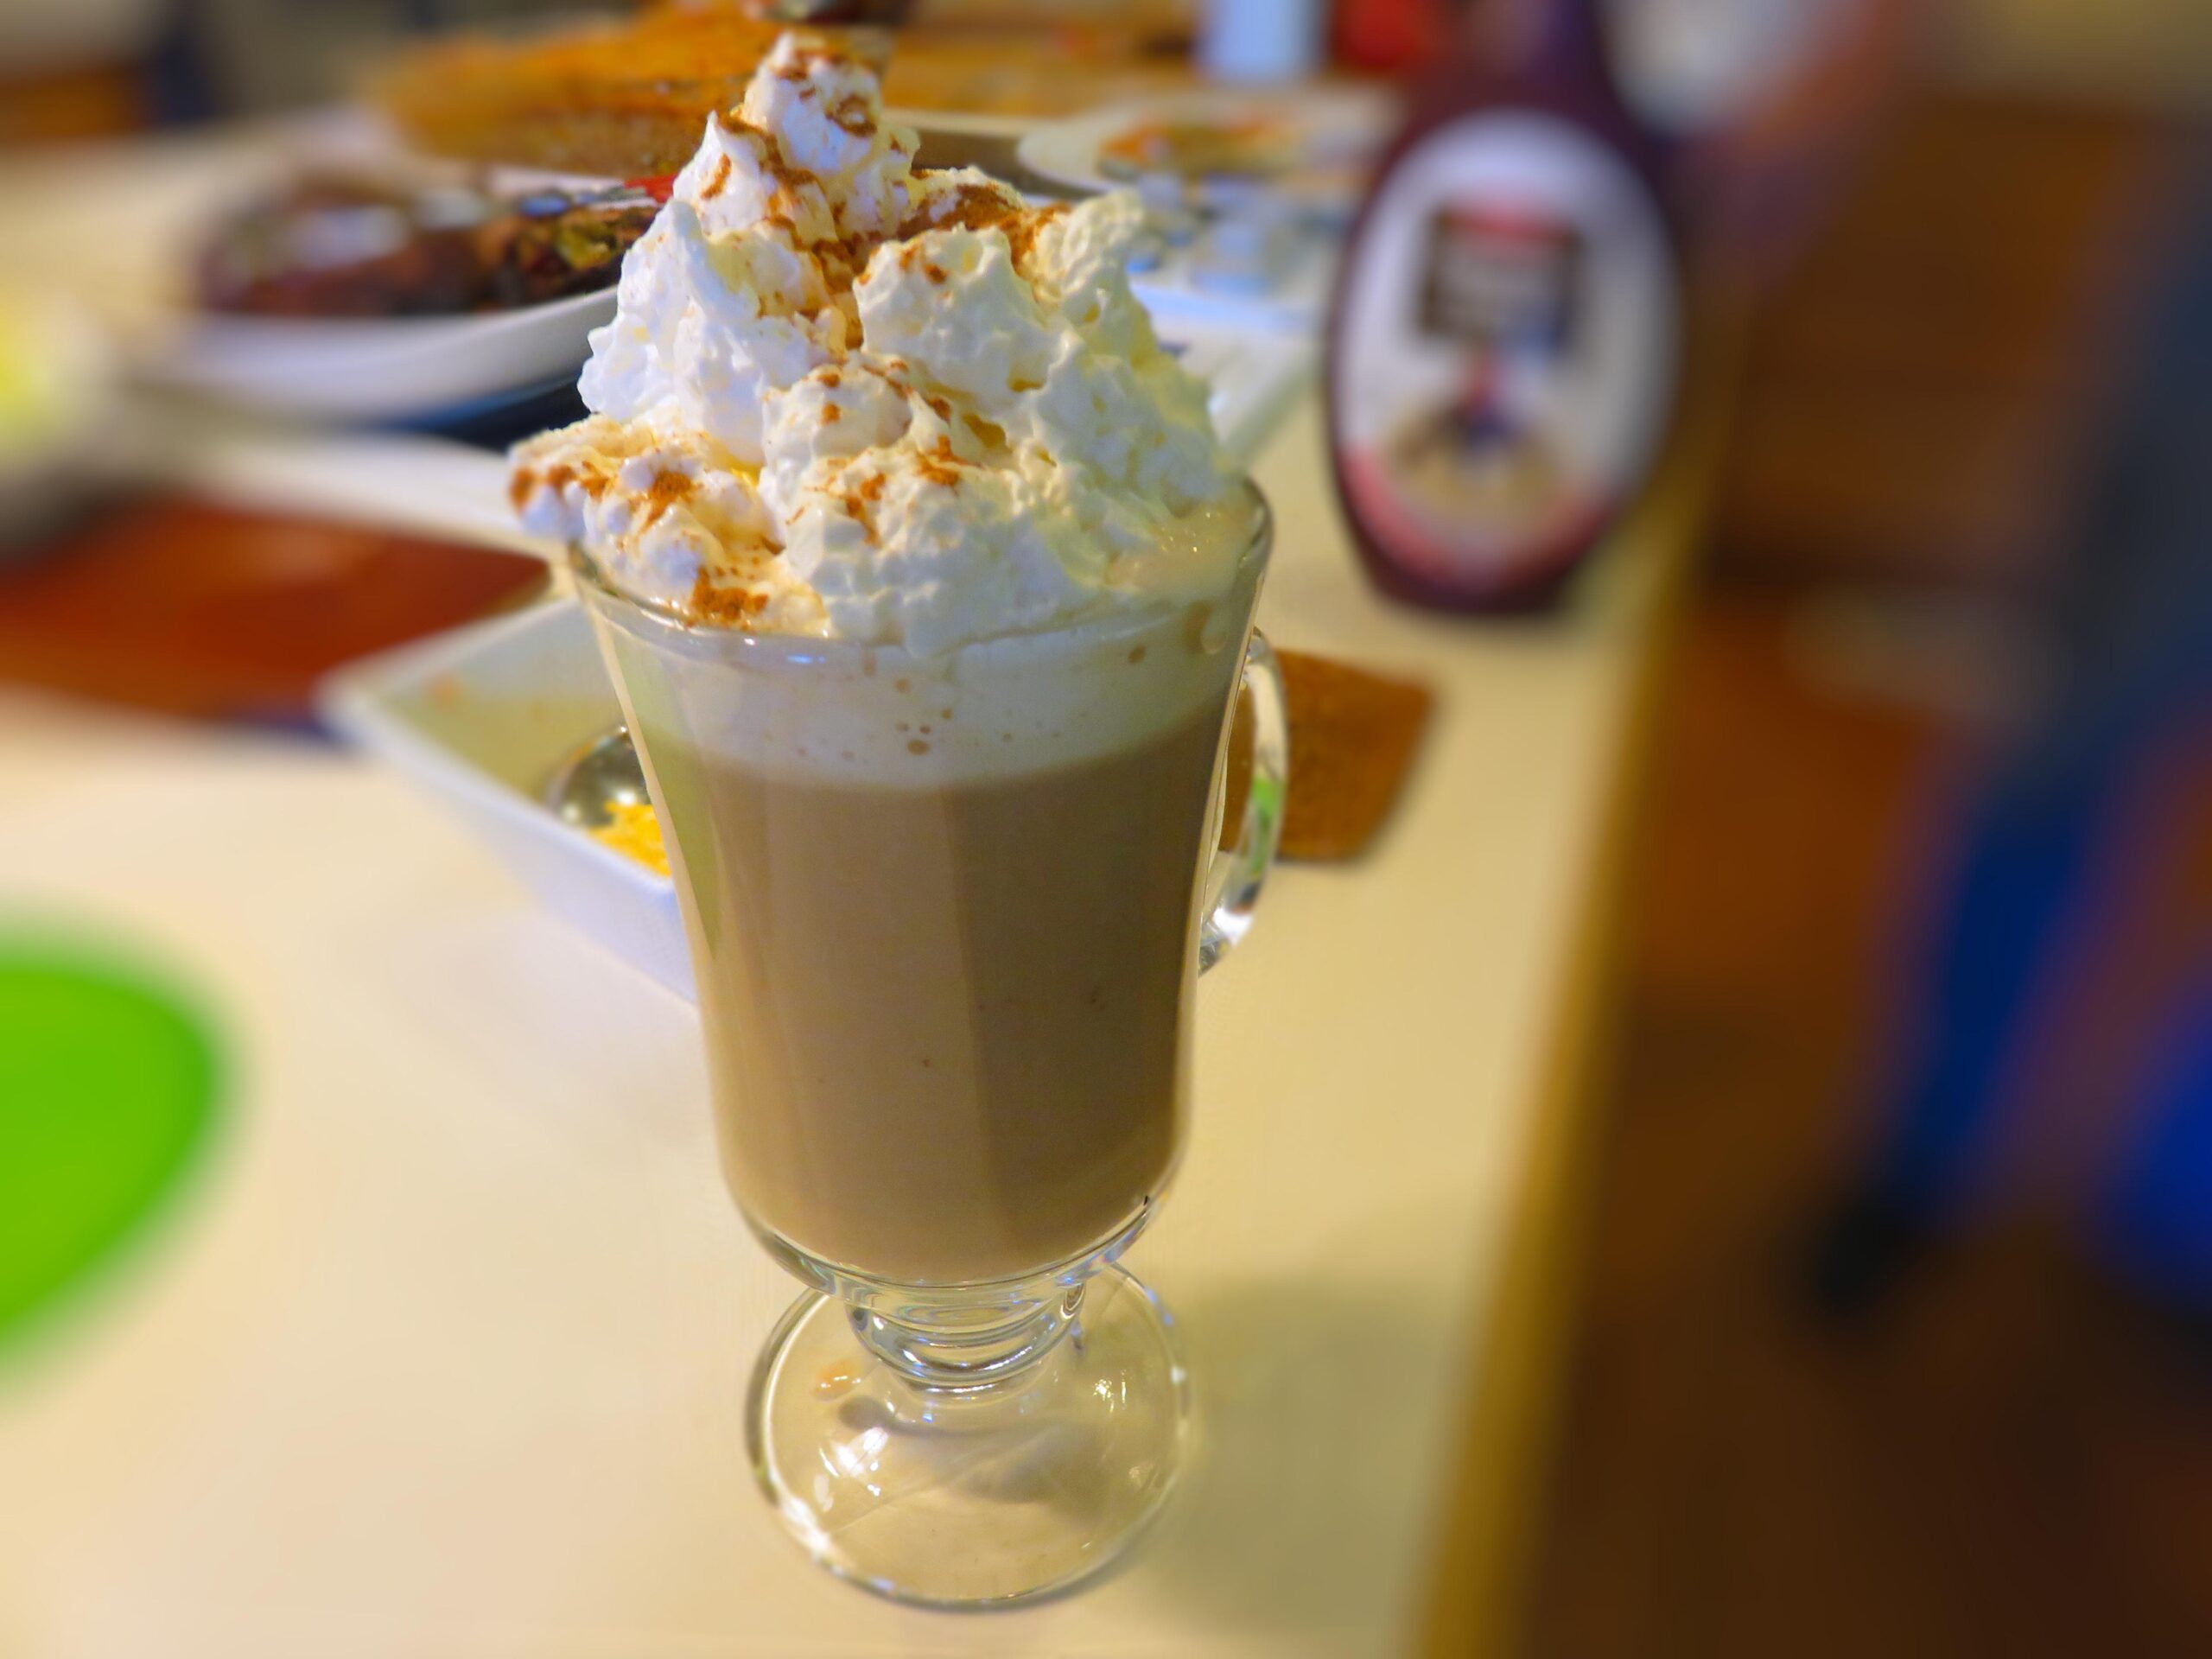  Give your taste buds a vacation south of the border with a cup of Café Mexicano.